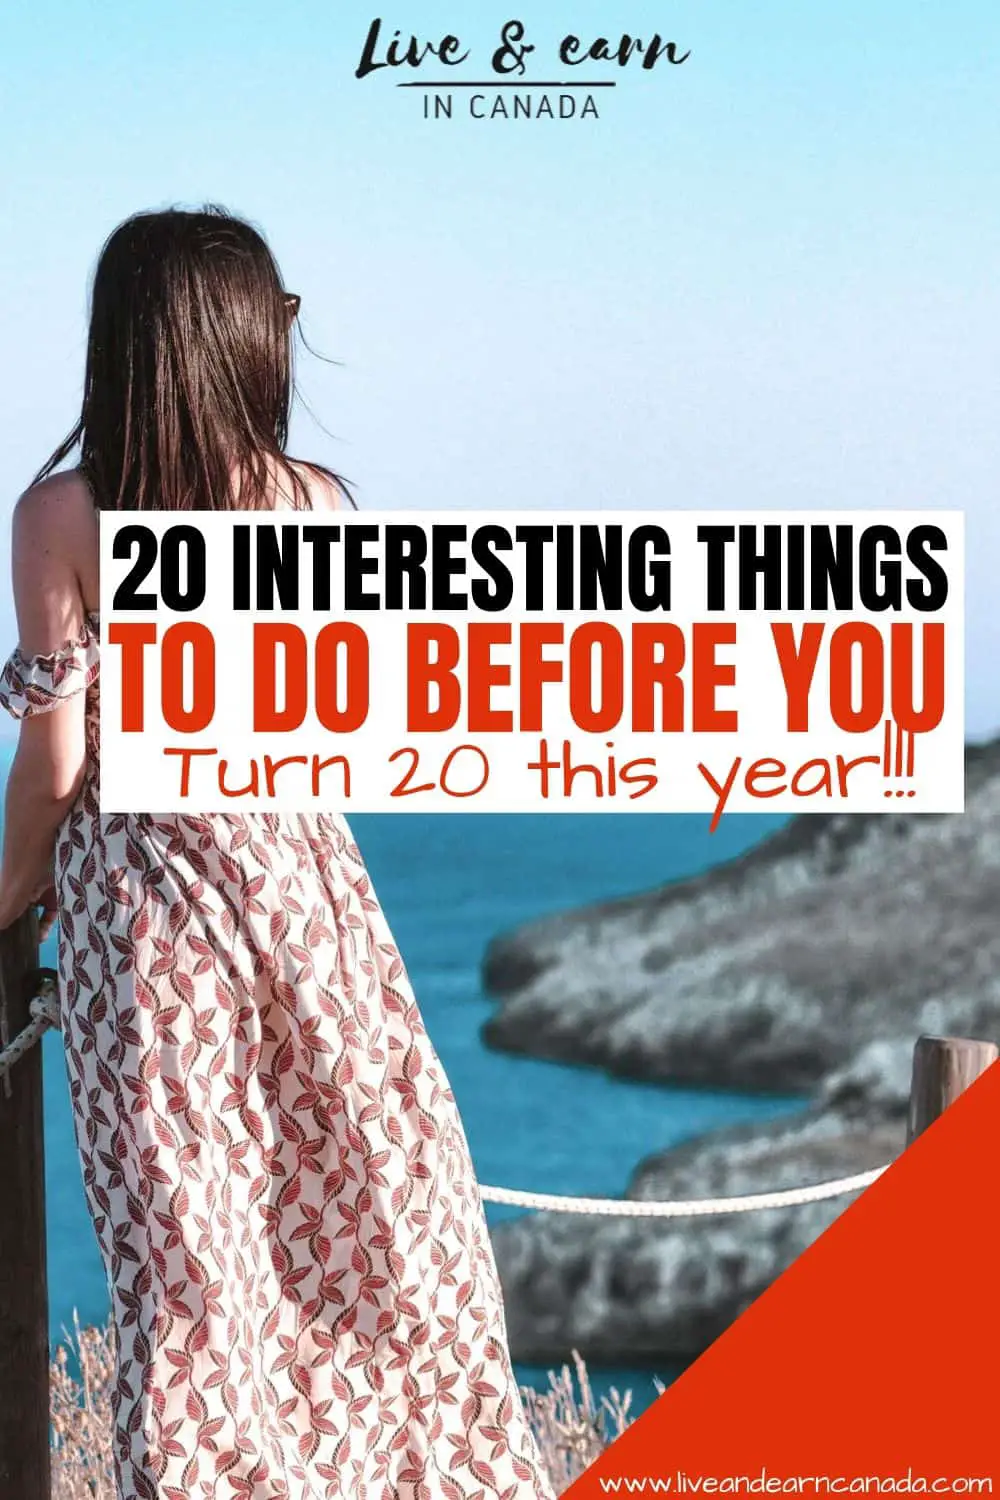 Here are a few things to do in your 20s that will not only get you through but allow you to slay your 20s. #thingstoinyour20s #survivingyour20s #selfimprovement #thingstodobefore30 Here is what you need to do before you turn 20!